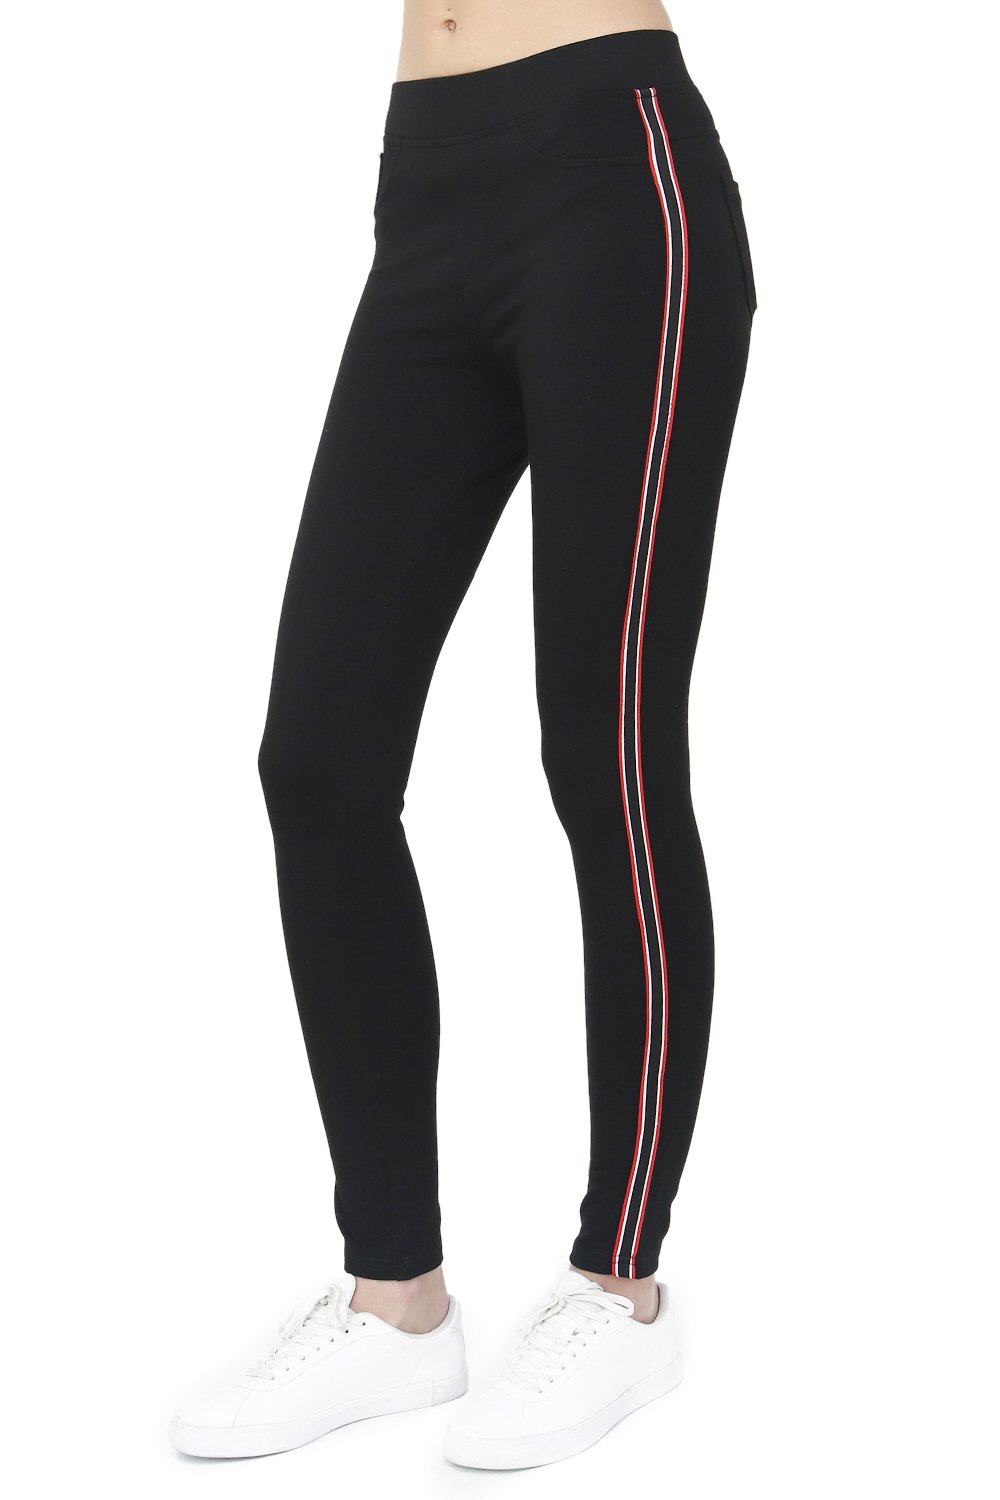 SLIM FIT PANT WITH BI-COLORS SIDE STRIPS